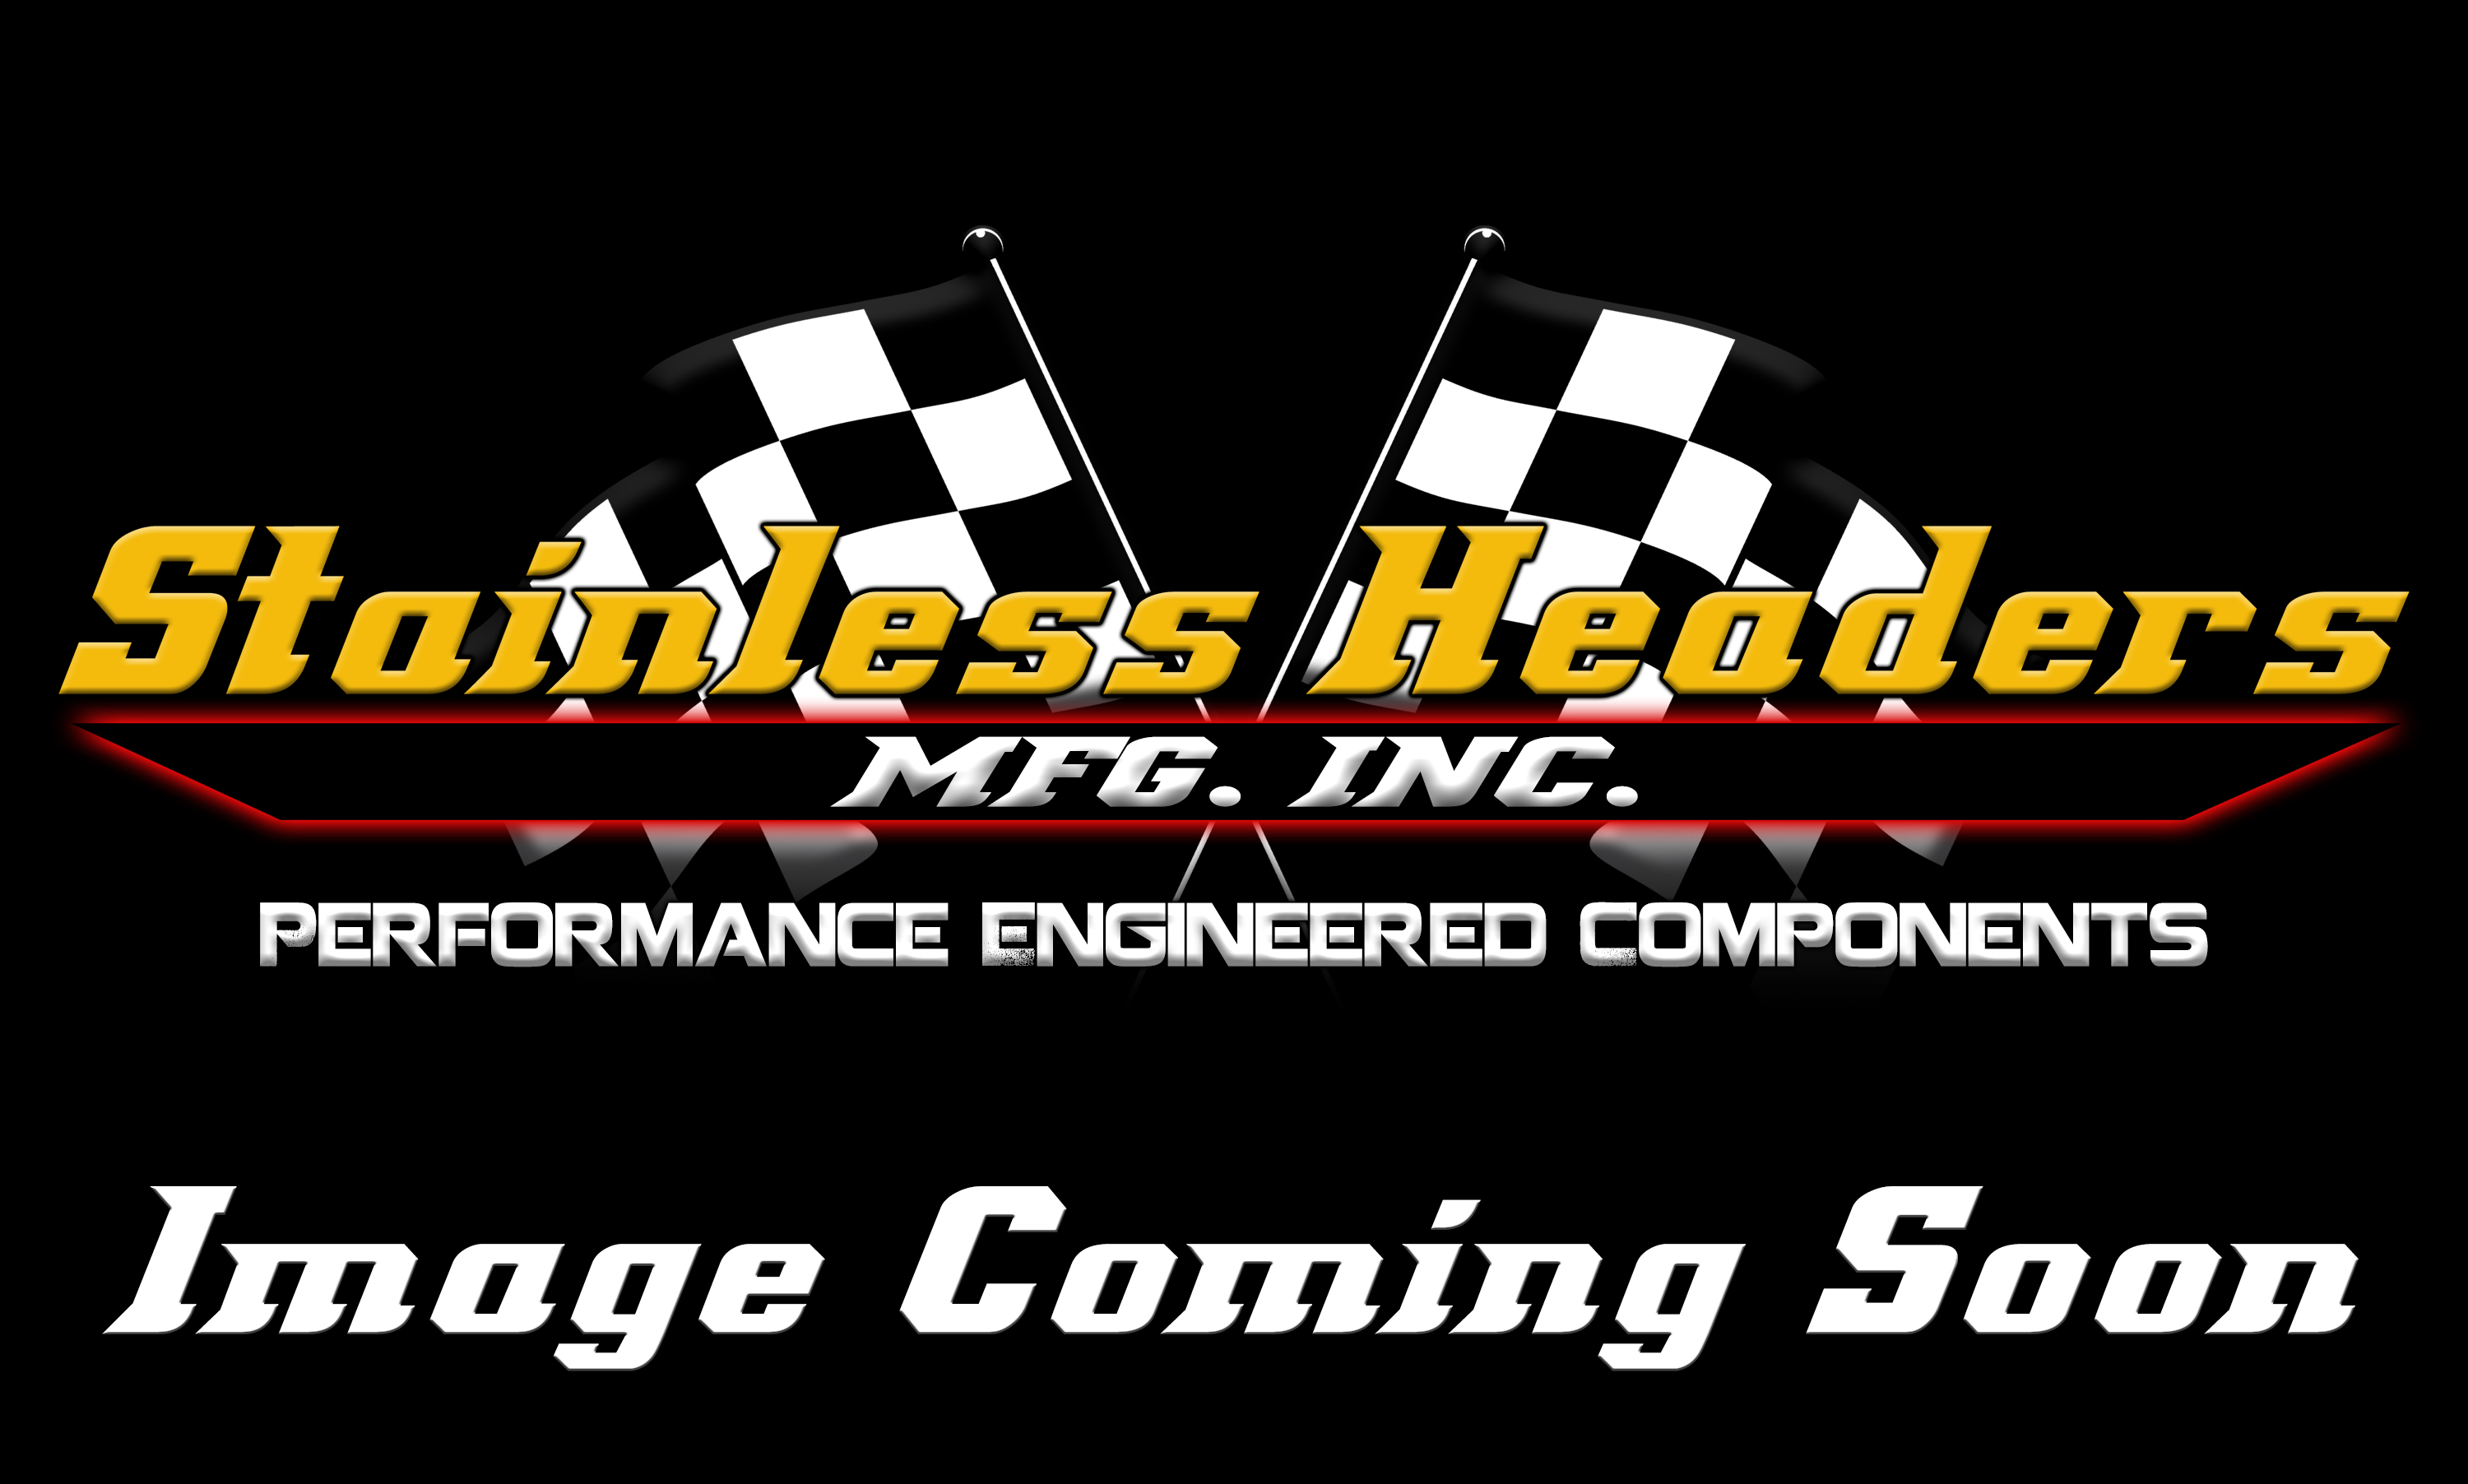 Stainless Headers - 2 1/8" Primary 6 into 1 321 Stainless Steel Merge Collector-16ga 321ss